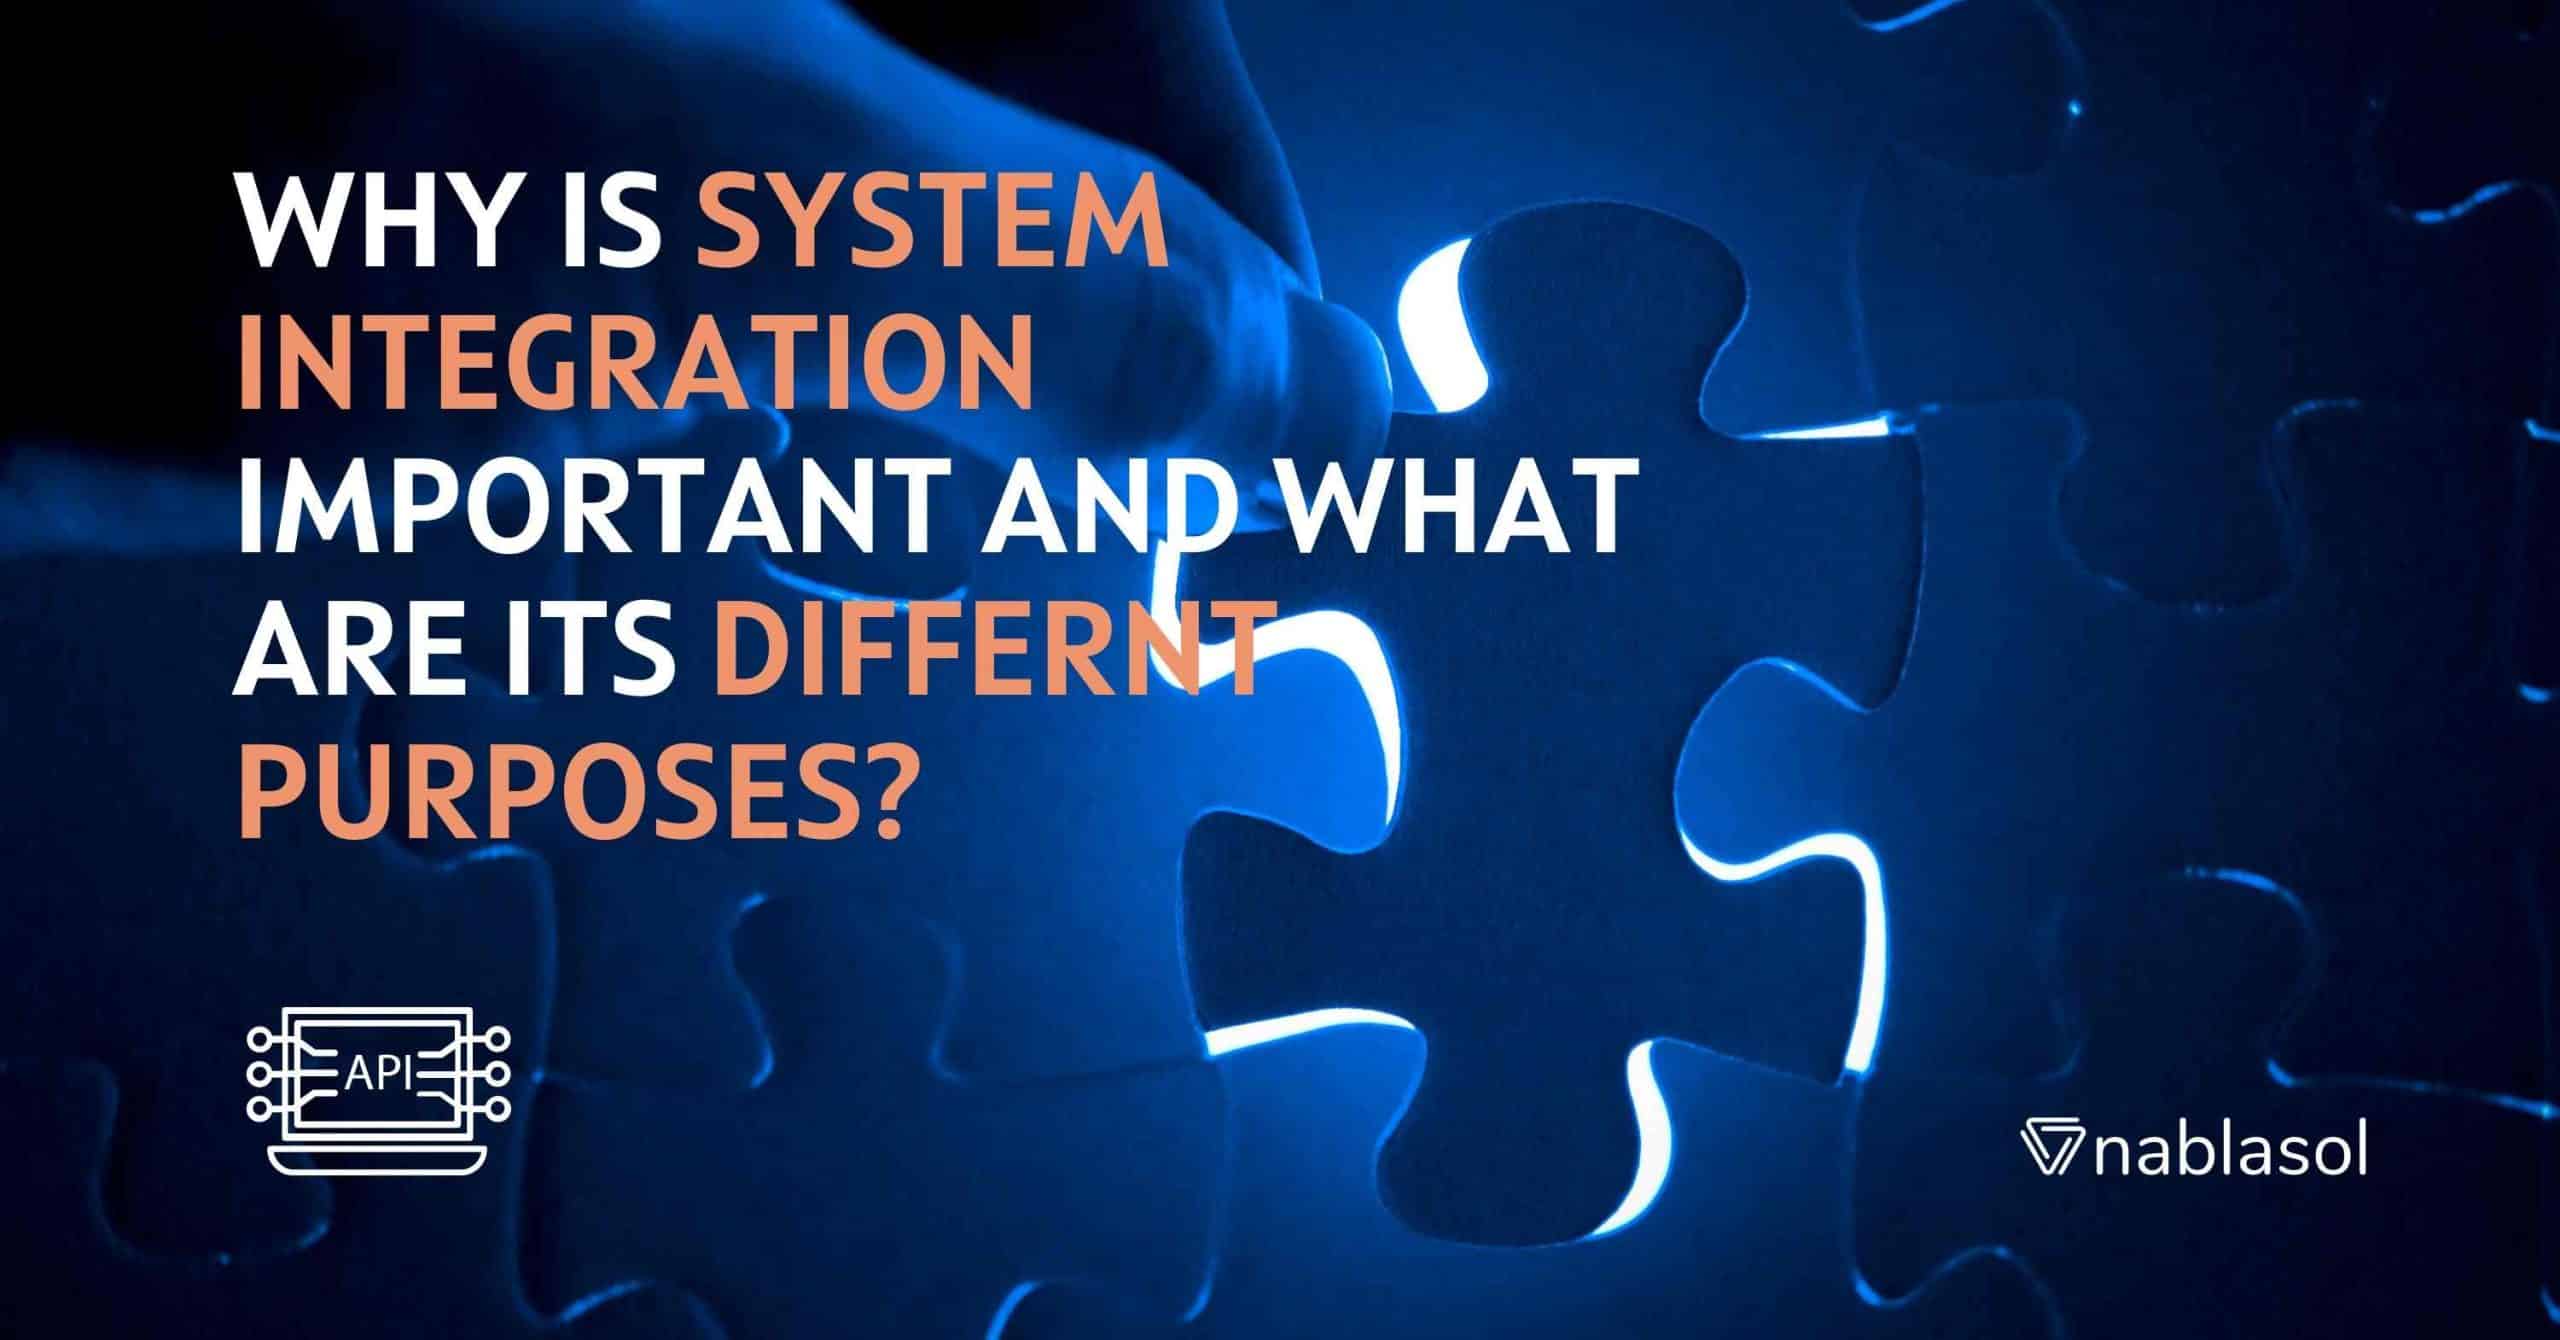 Why Is System Integration Important and What Are Its Different Purposes?